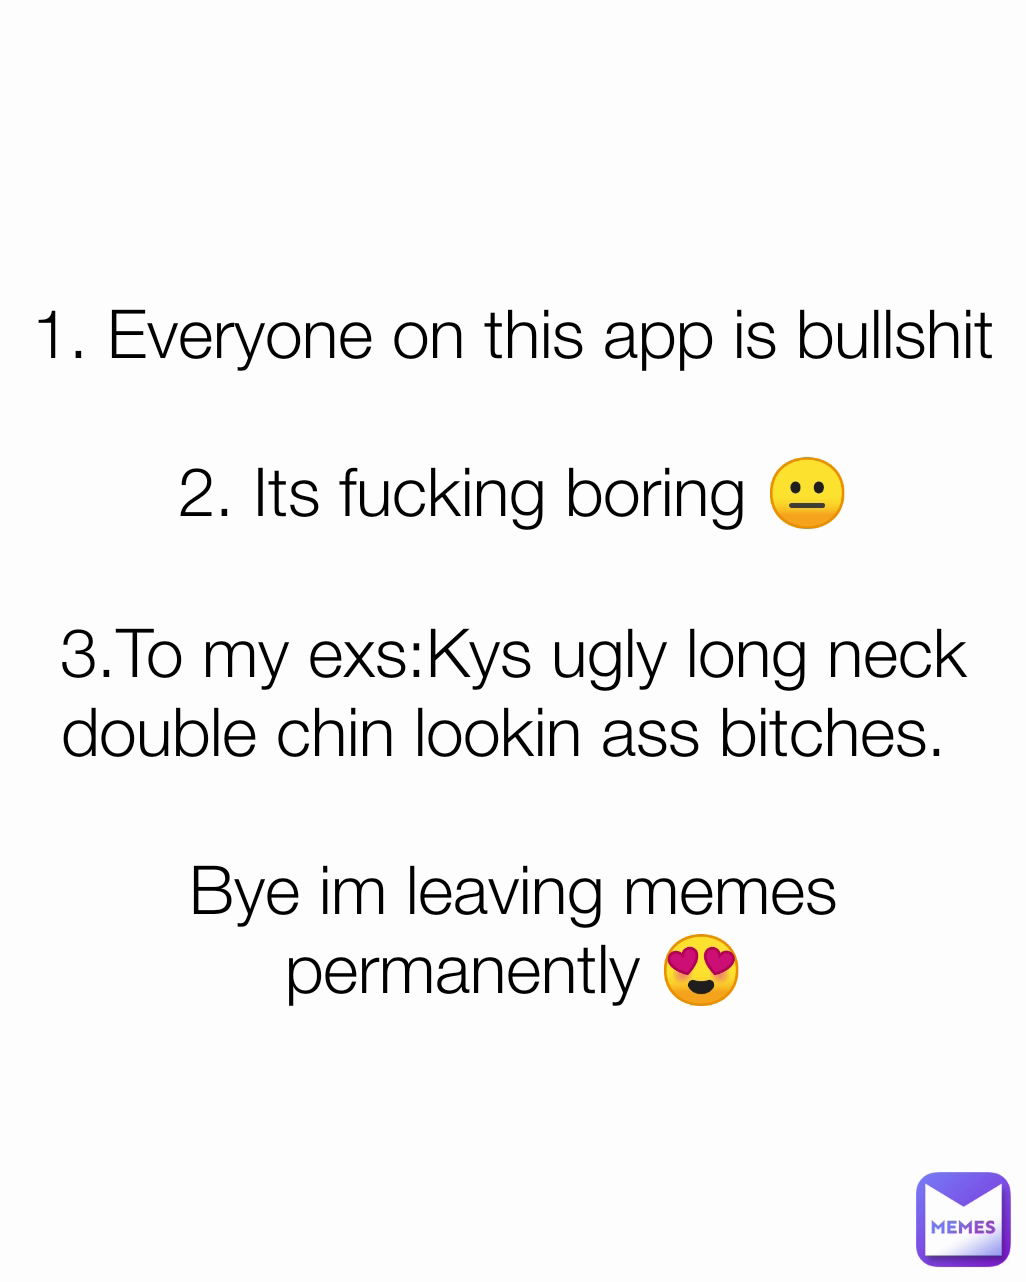 1. Everyone on this app is bullshit

2. Its fucking boring 😐

3.To my exs:Kys ugly long neck double chin lookin ass bitches. 

Bye im leaving memes permanently 😍